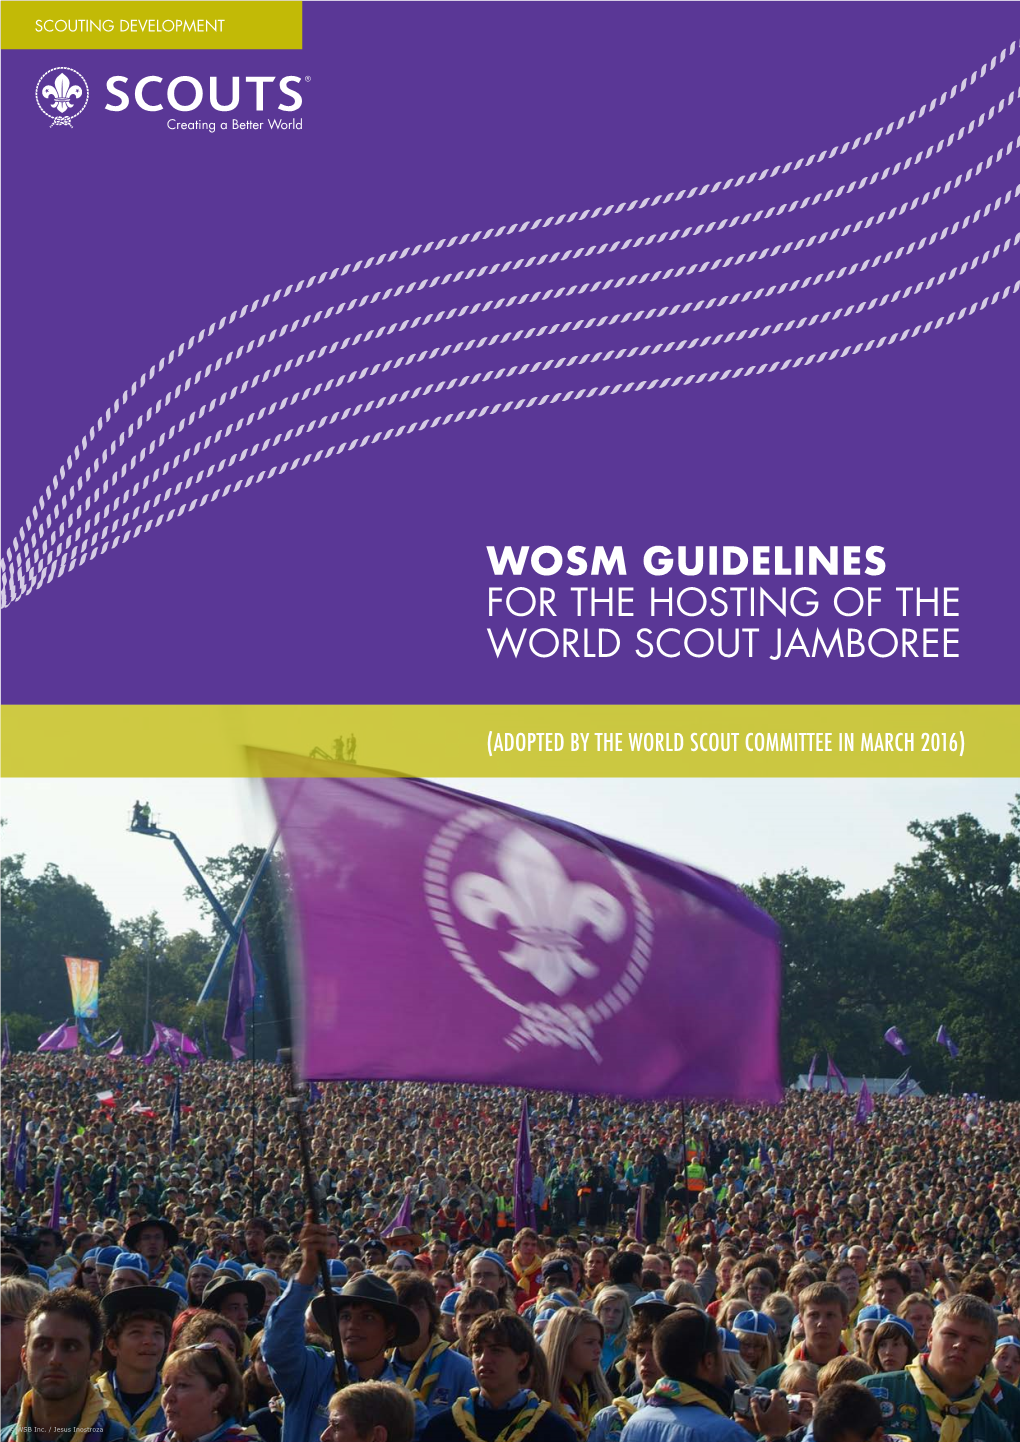 Wosm Guidelines for the Hosting of the World Scout Jamboree